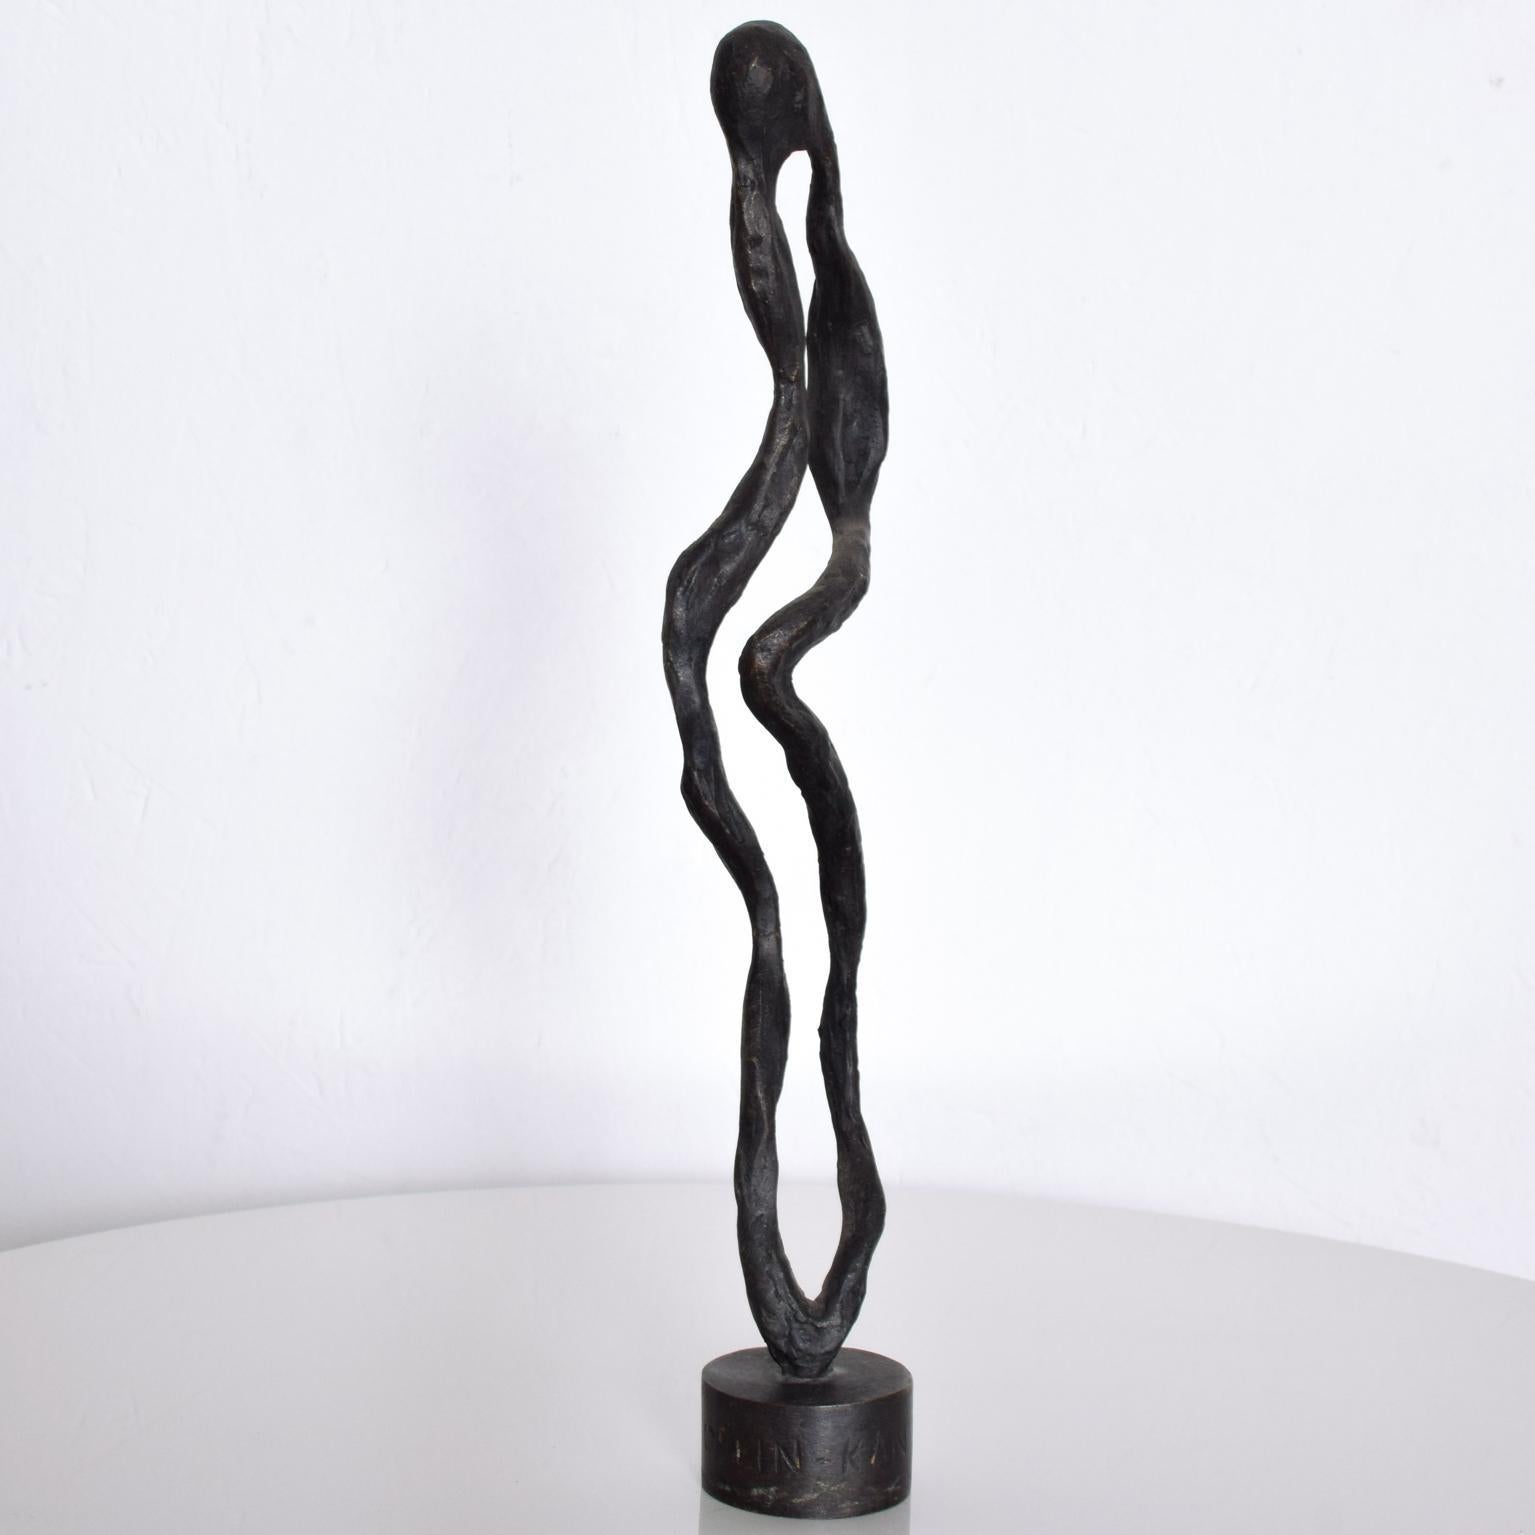 Late 20th Century Abstract Sculpture, Ollin Kan, B Canfield 08, Mid-Century Modern